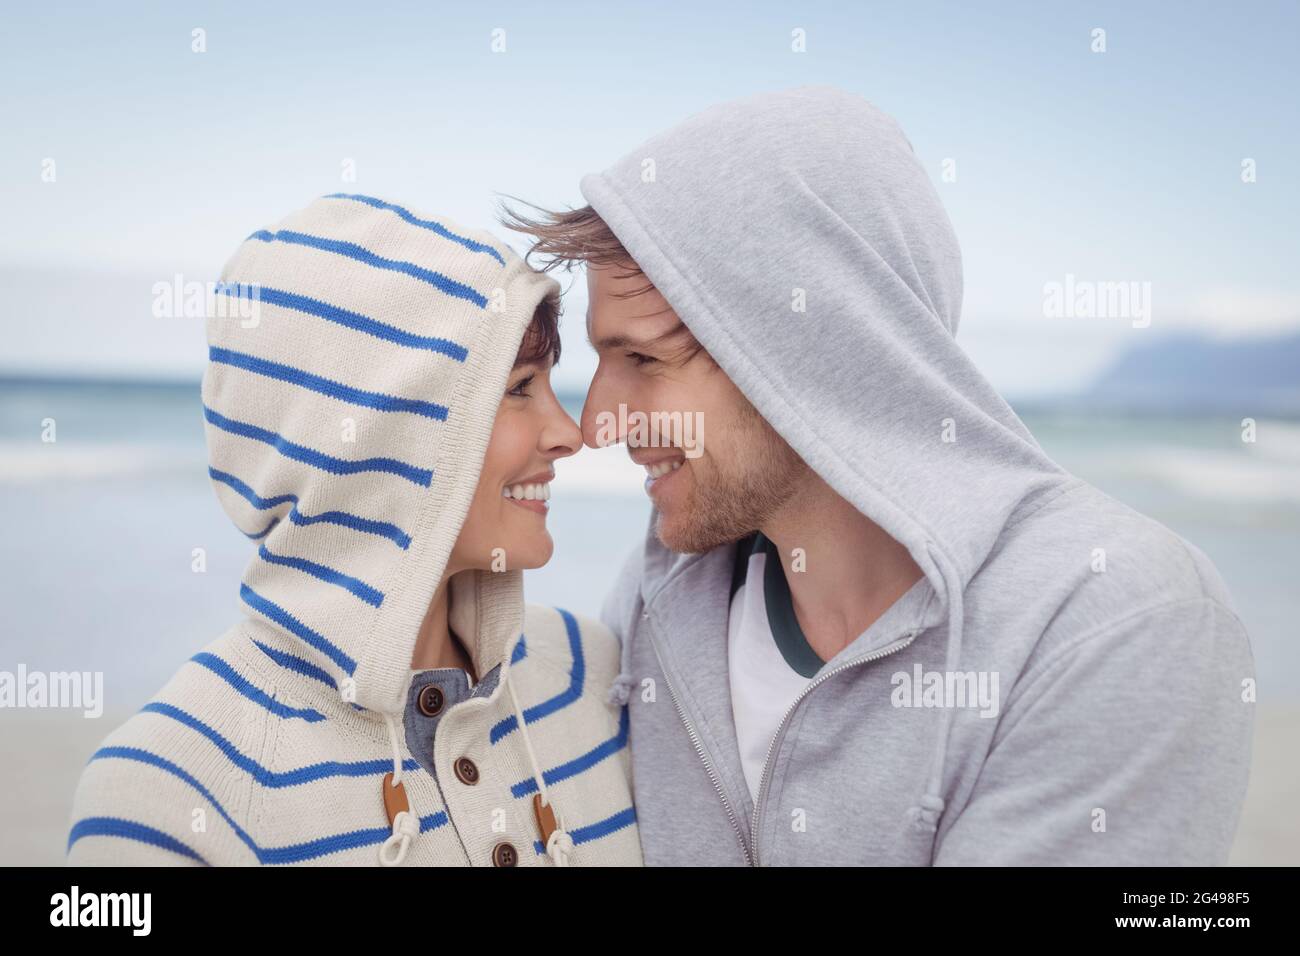 Smiling couple wearing hooded sweater during winter Stock Photo